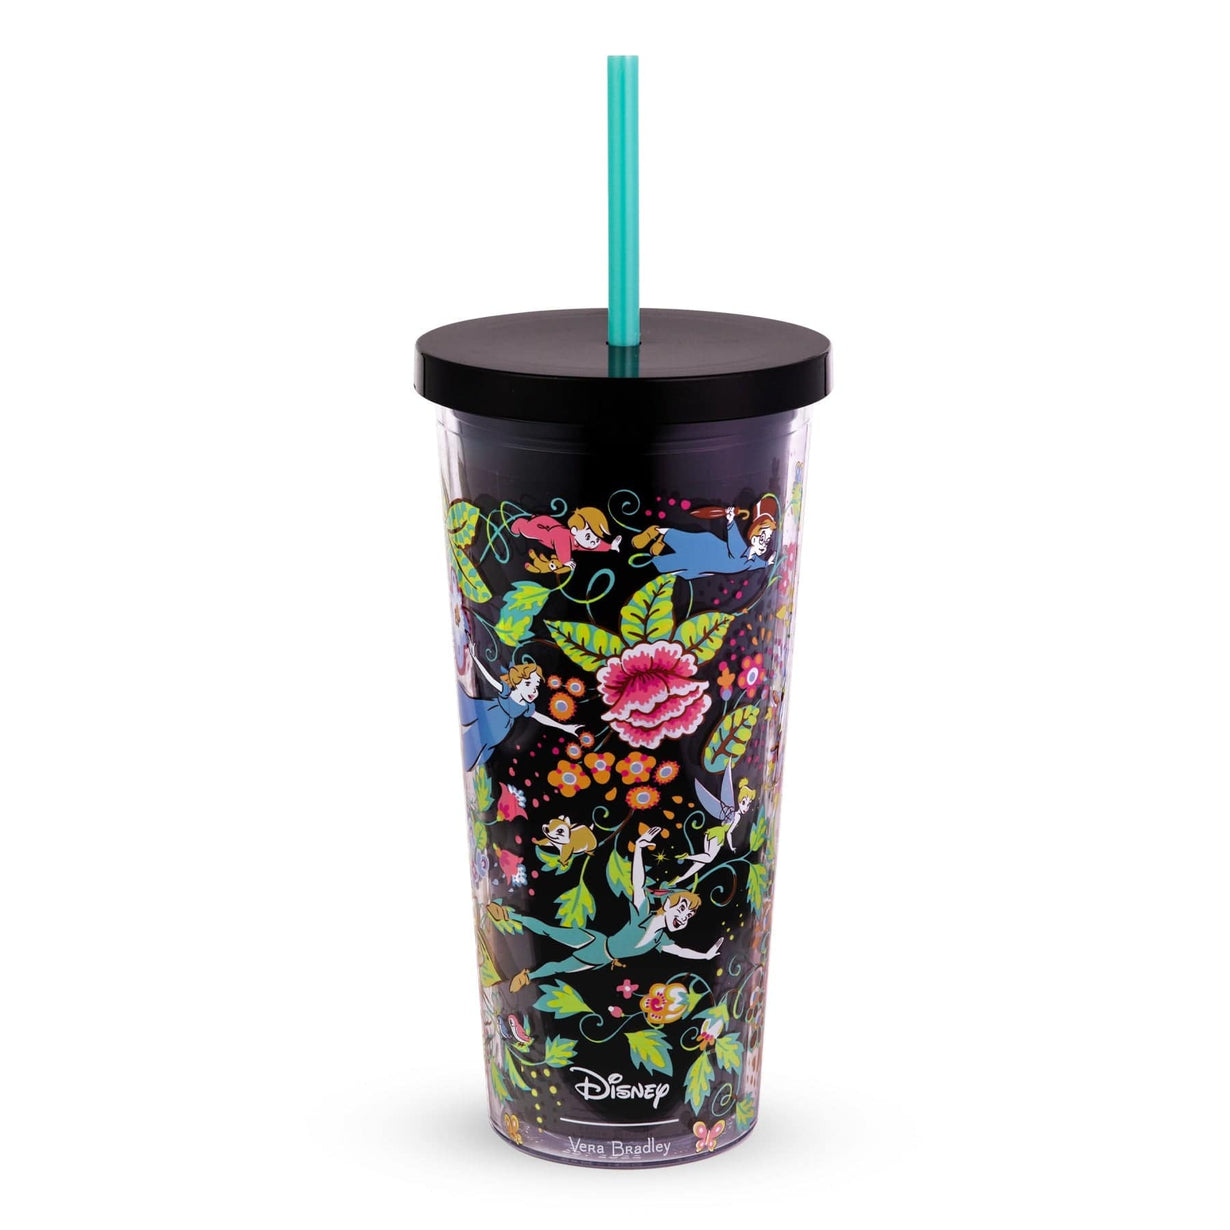 Disney Winnie the Pooh Tumbler with Color Changing Straw